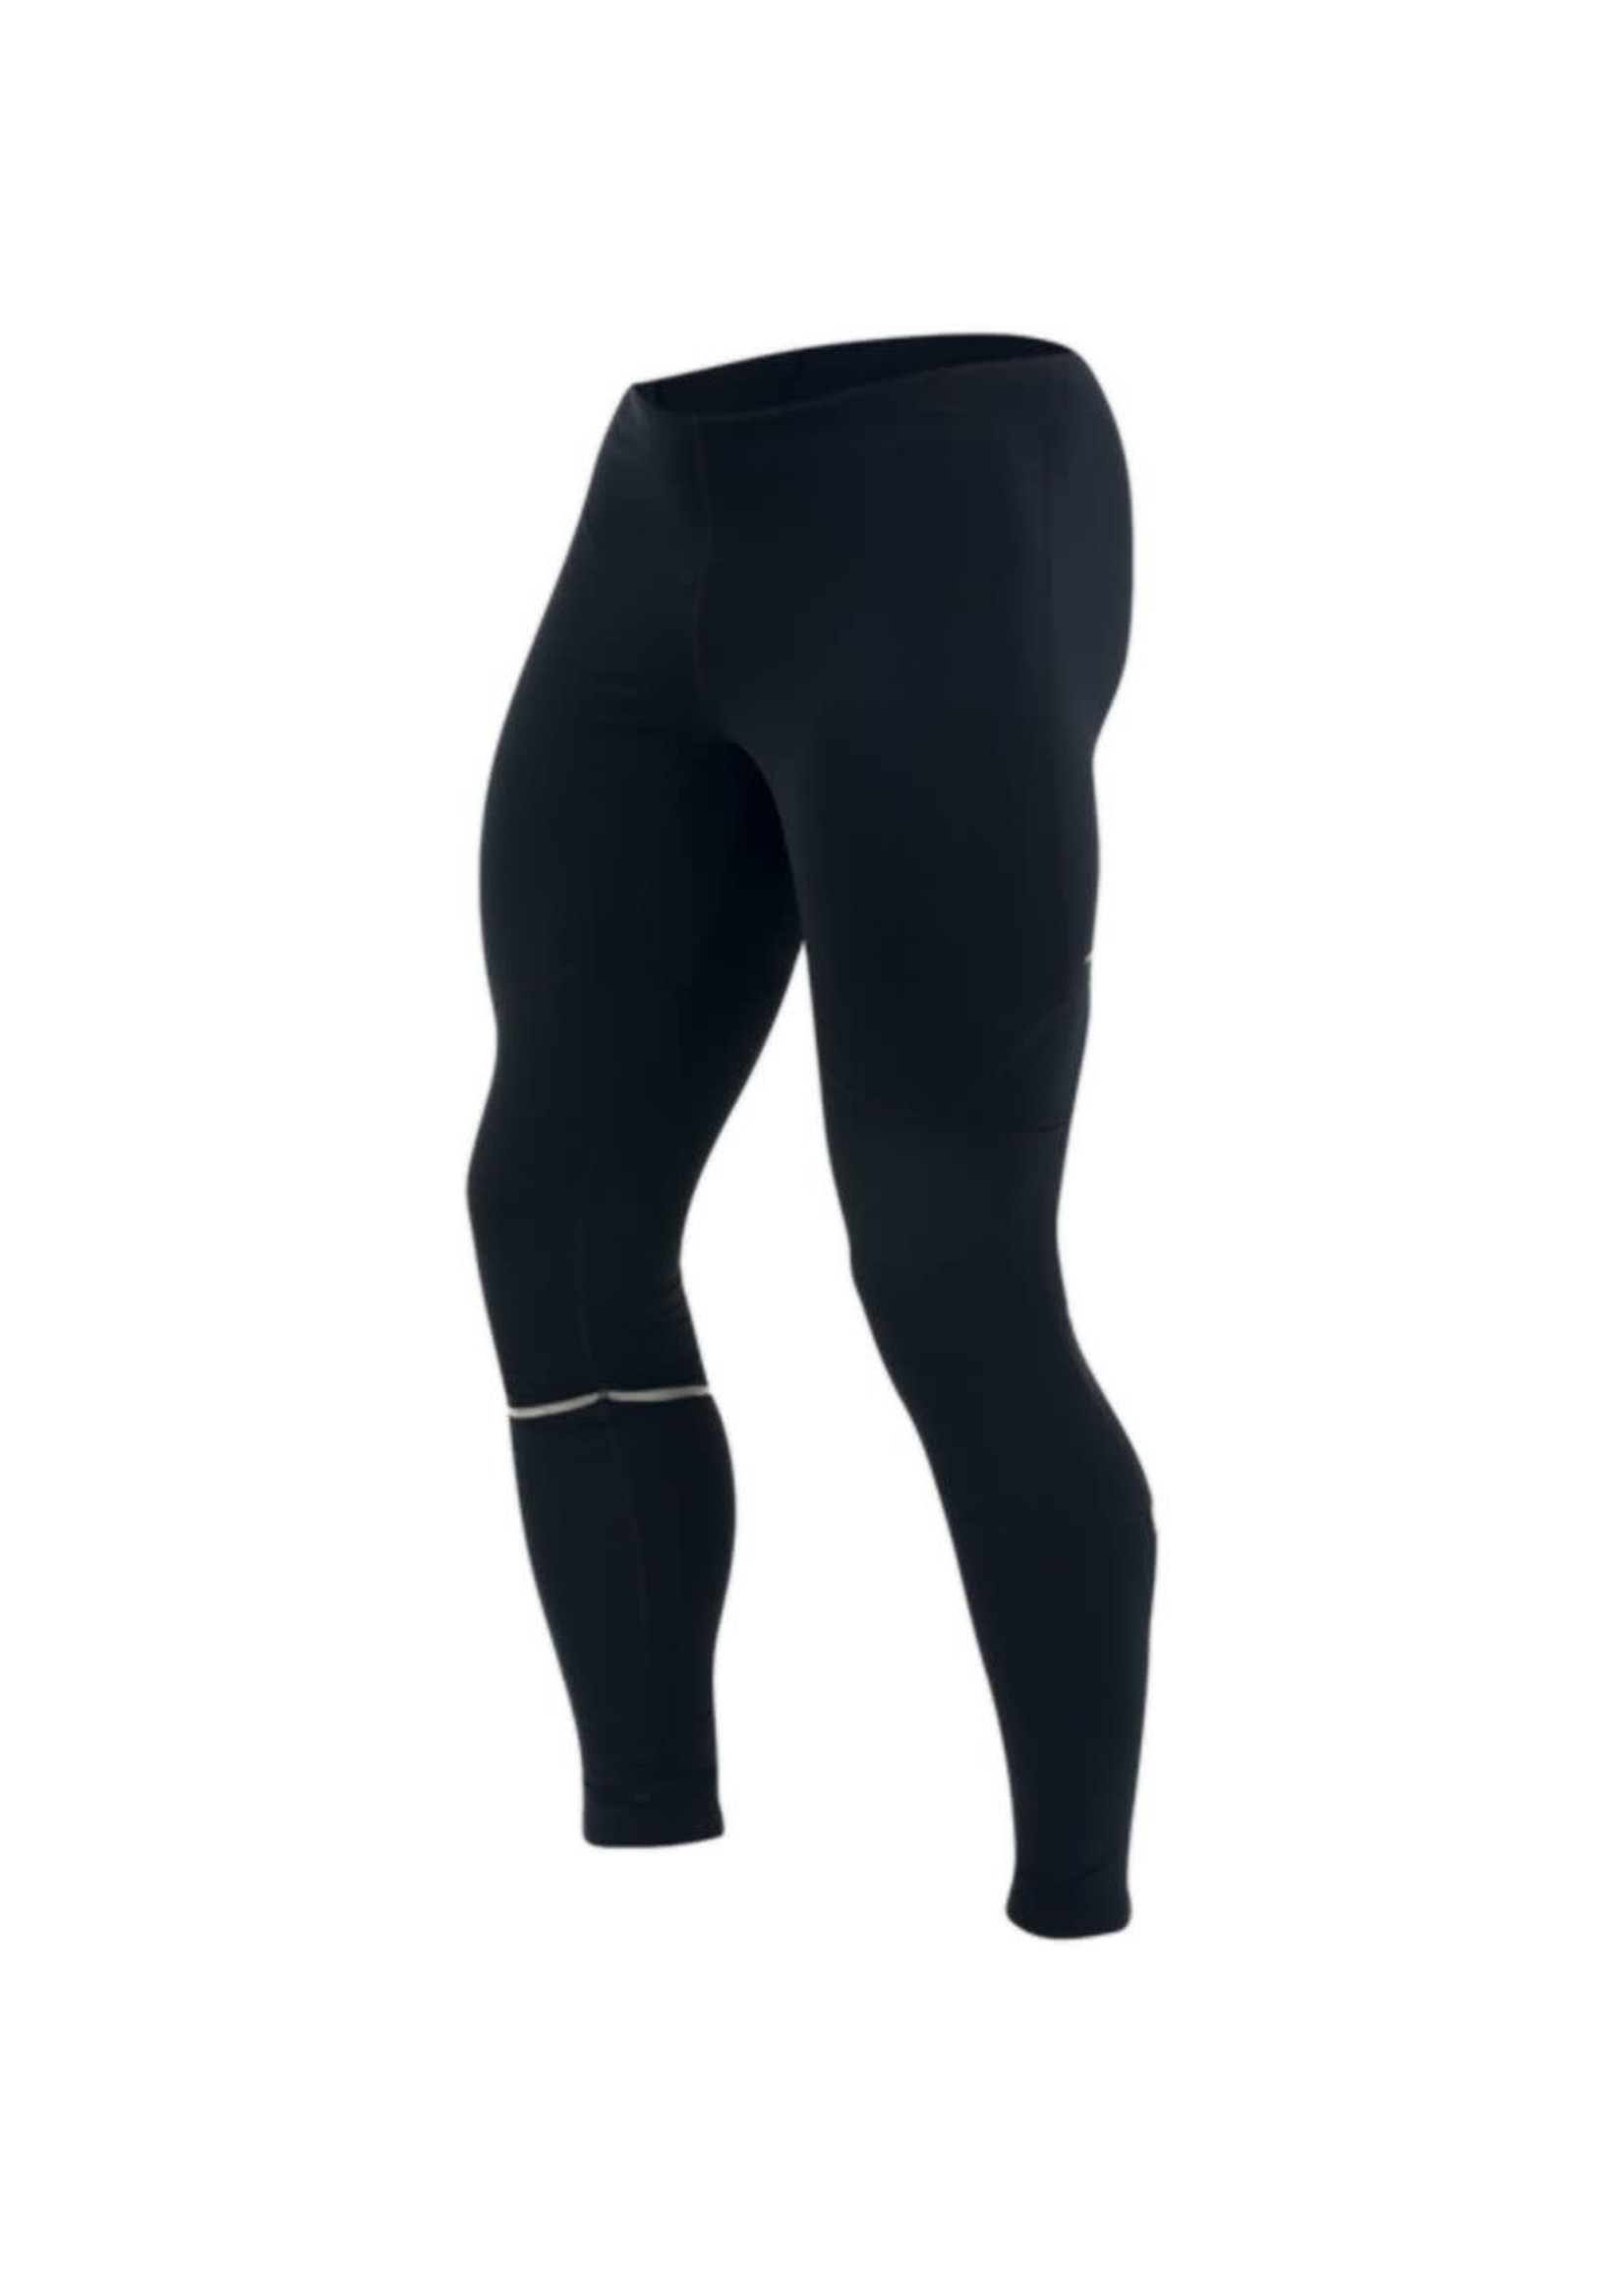 Collants Fly Thermal Tights pour hommes